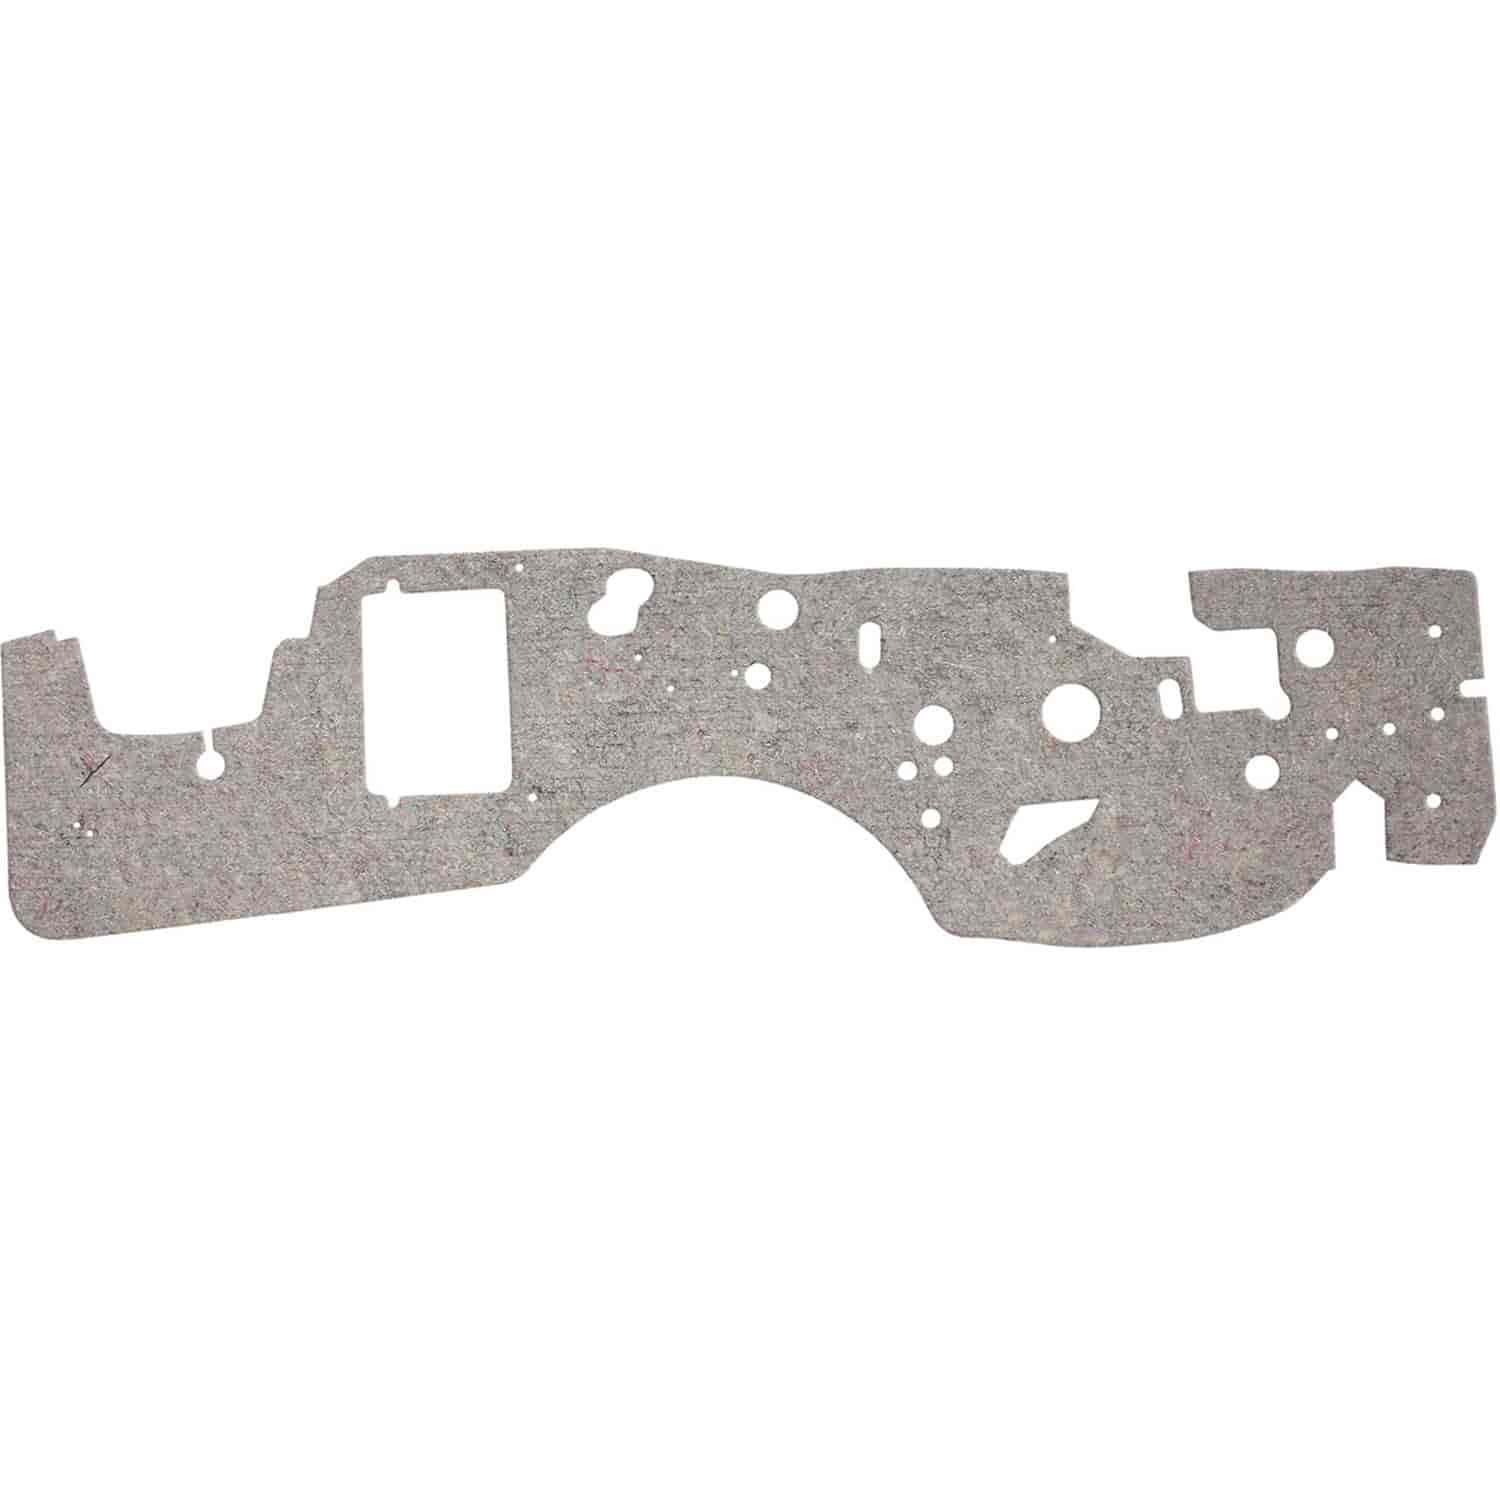 Firewall Insulation Pad 1973-77 Olds Cutlass/442 Without A/C